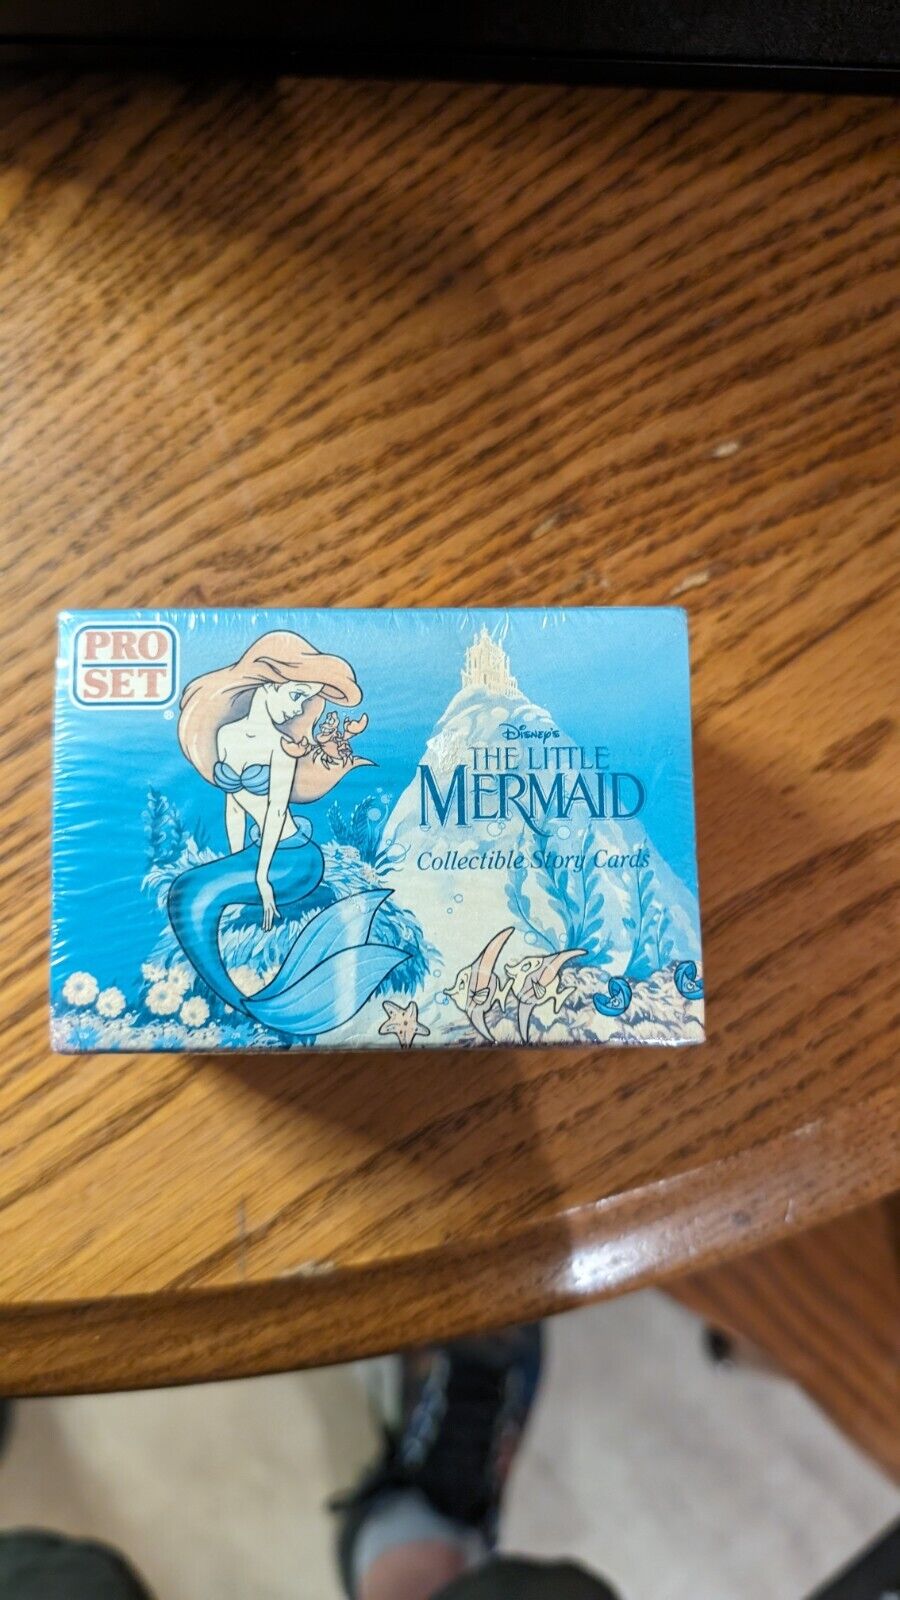 1991 PRO SET DISNEY THE LITTLE MERMAID COLLECTIBLE STORY CARDS 36 PACKS SEALED